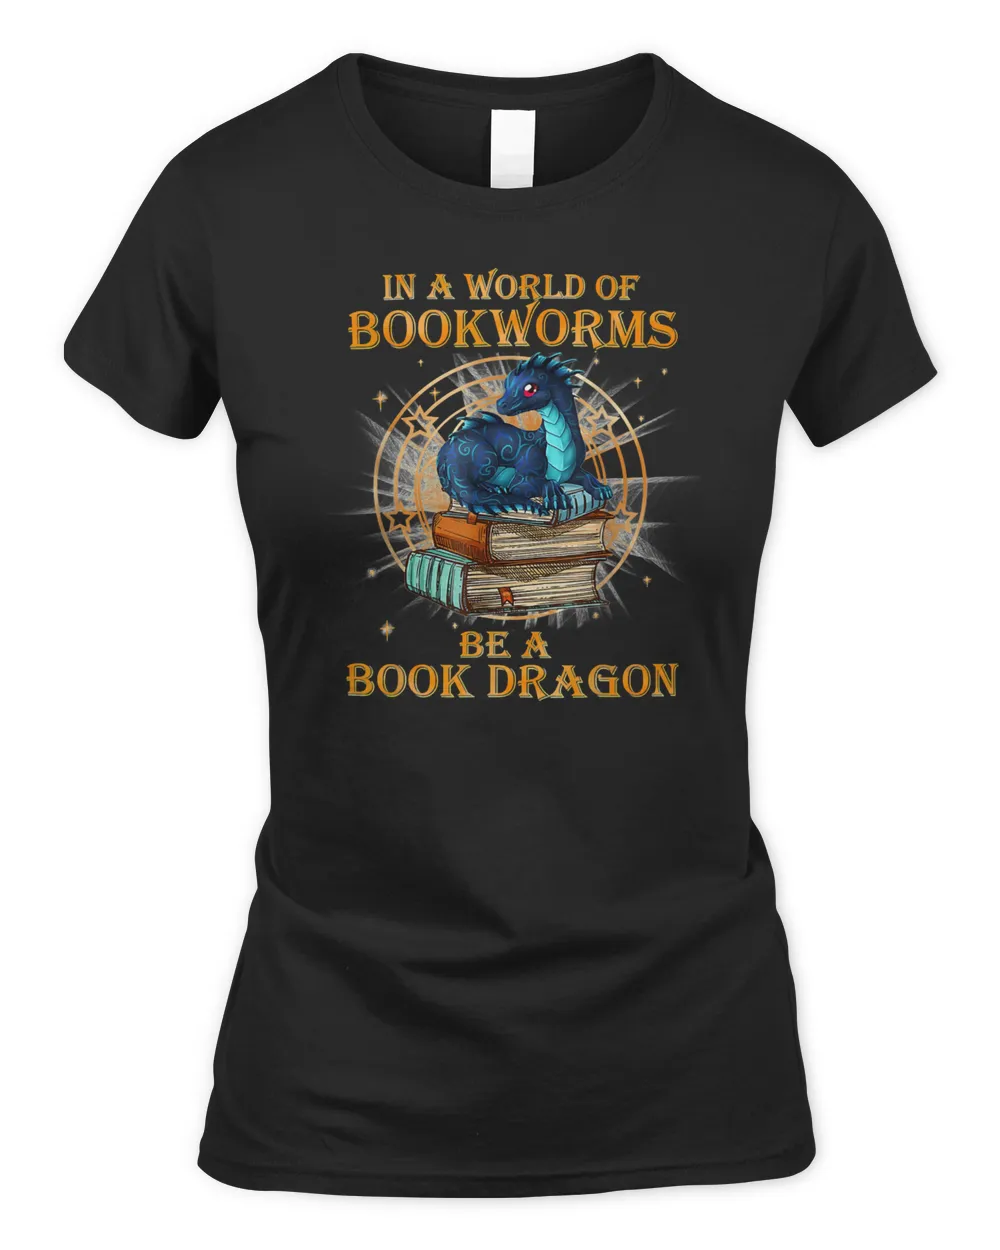 Book Reading Costumes In A World Of Bookworms Be A Book Dragon 449 booked